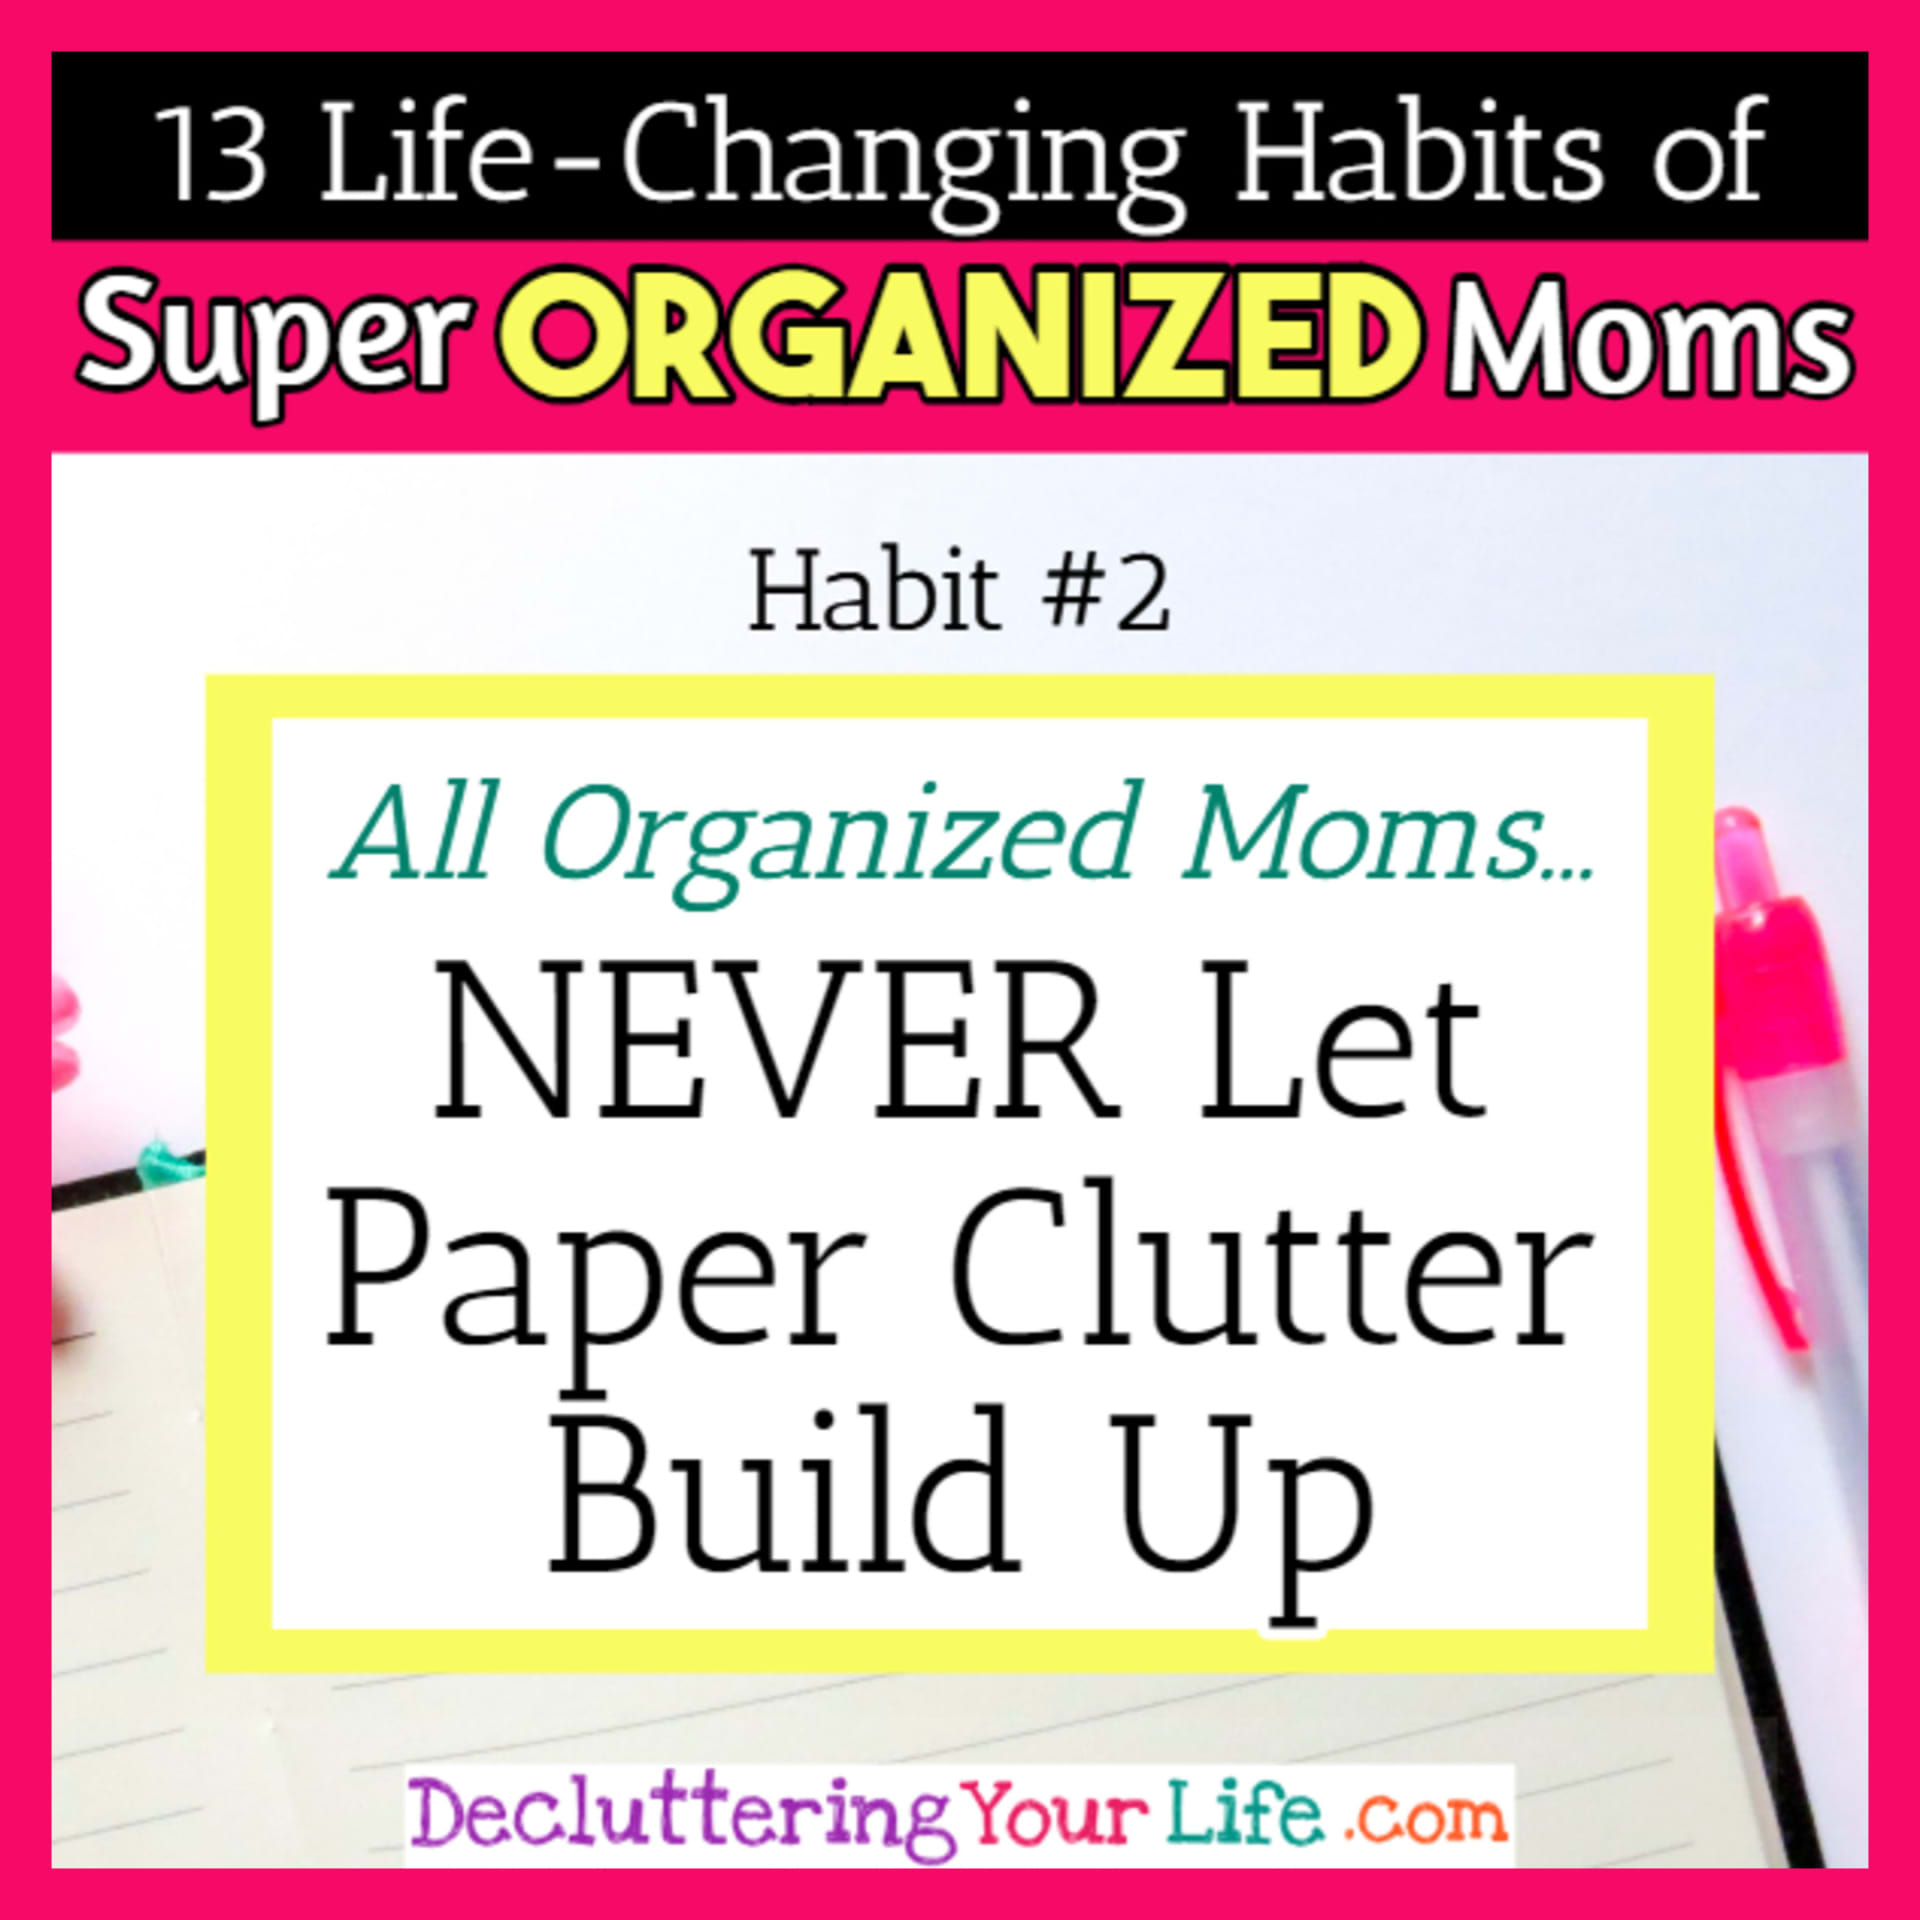 Organized moms NEVER let paper clutter become overwhelming - 13 Habits of Super Organized Mom - How To Be An Organized Mom (whether you work OR stay at home)